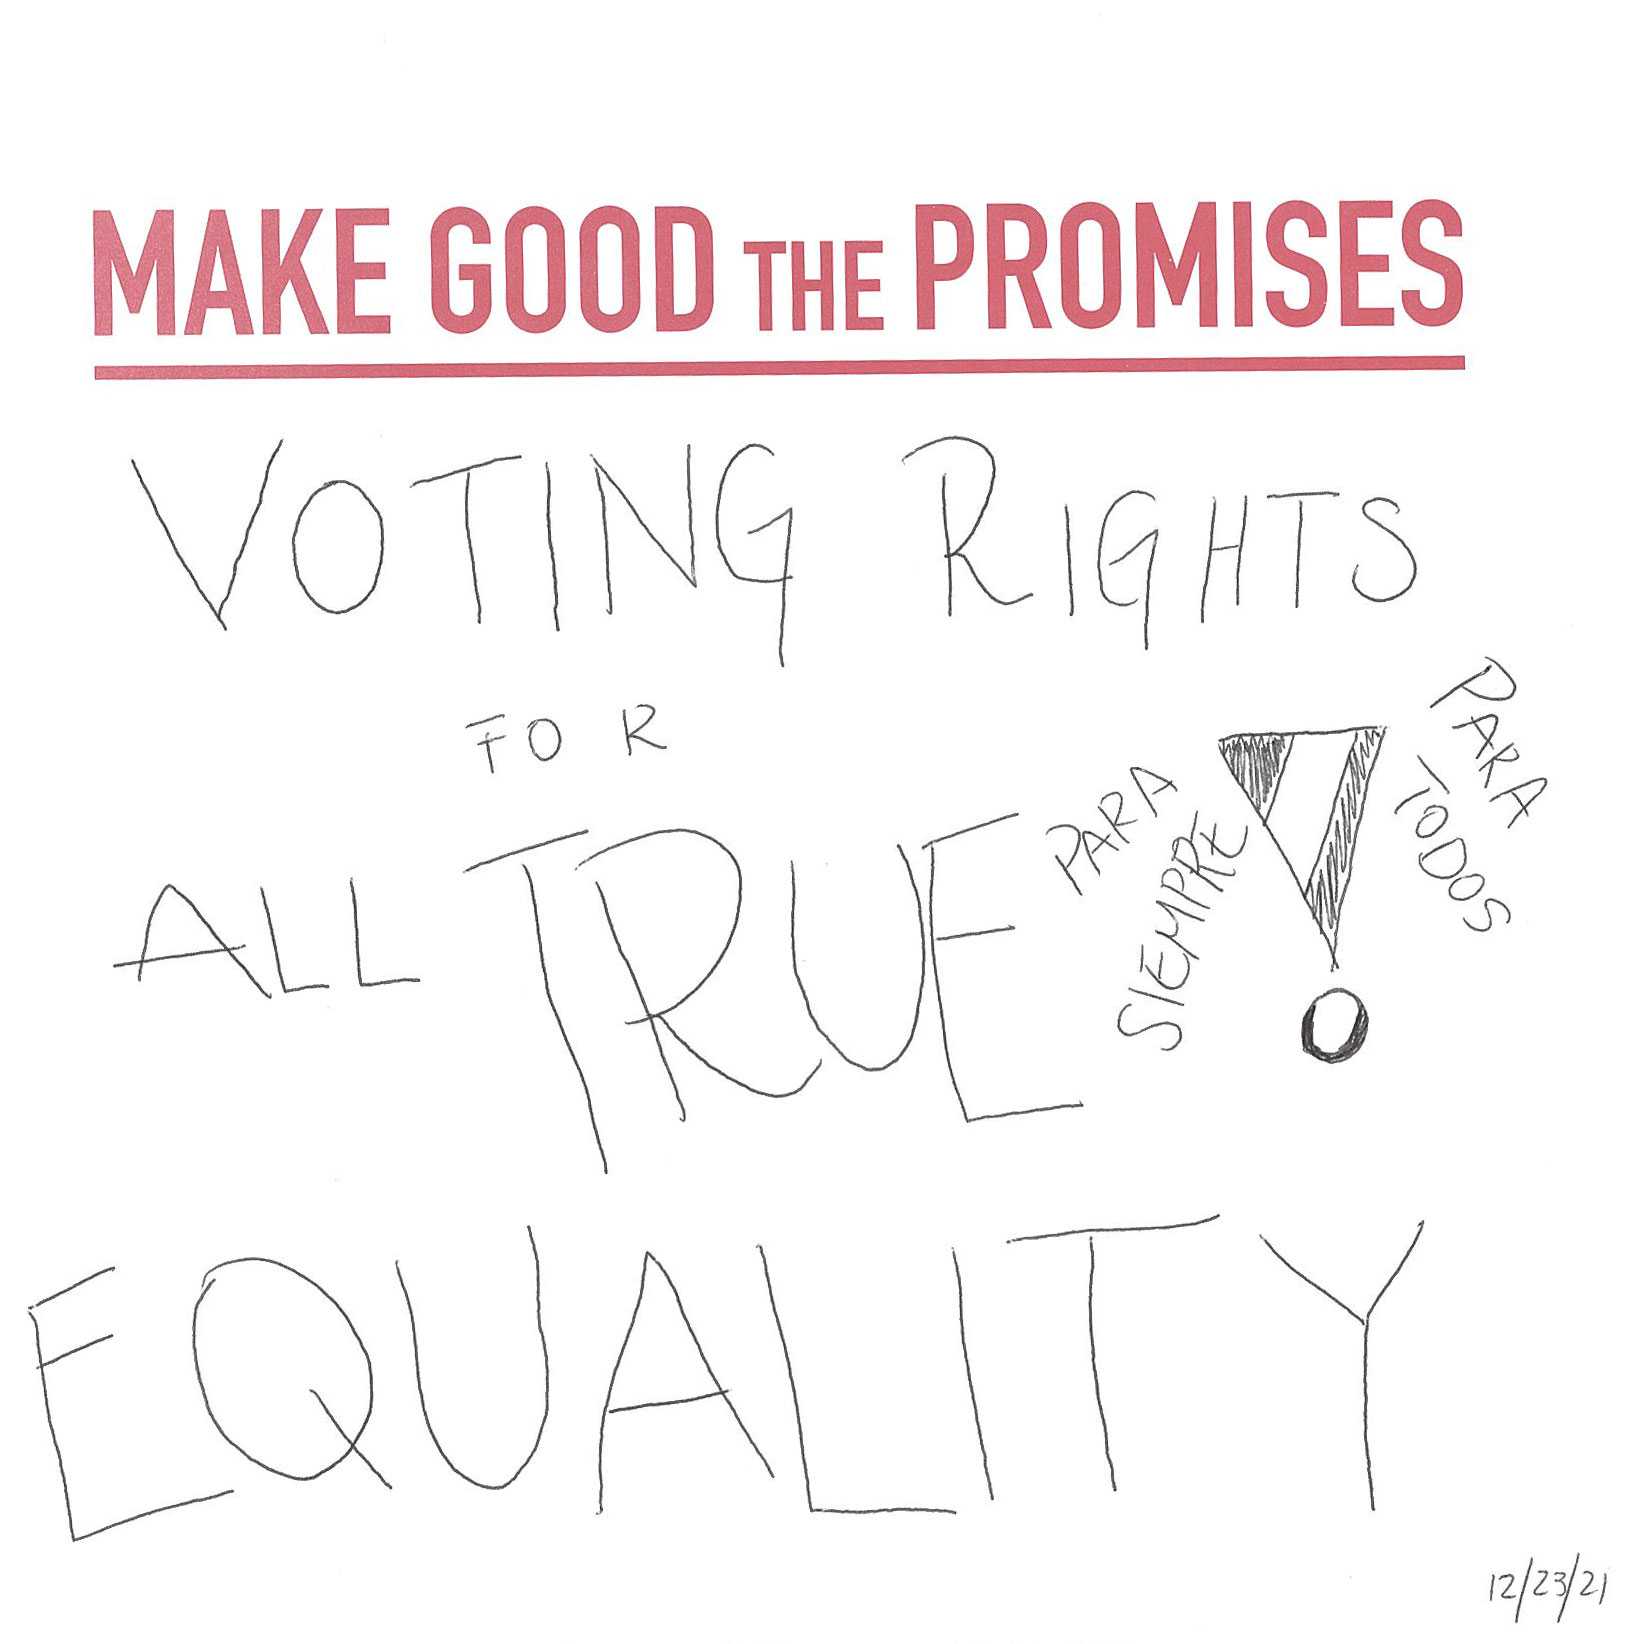 A white card with the handwritten message that states voting rights for all for true equality.